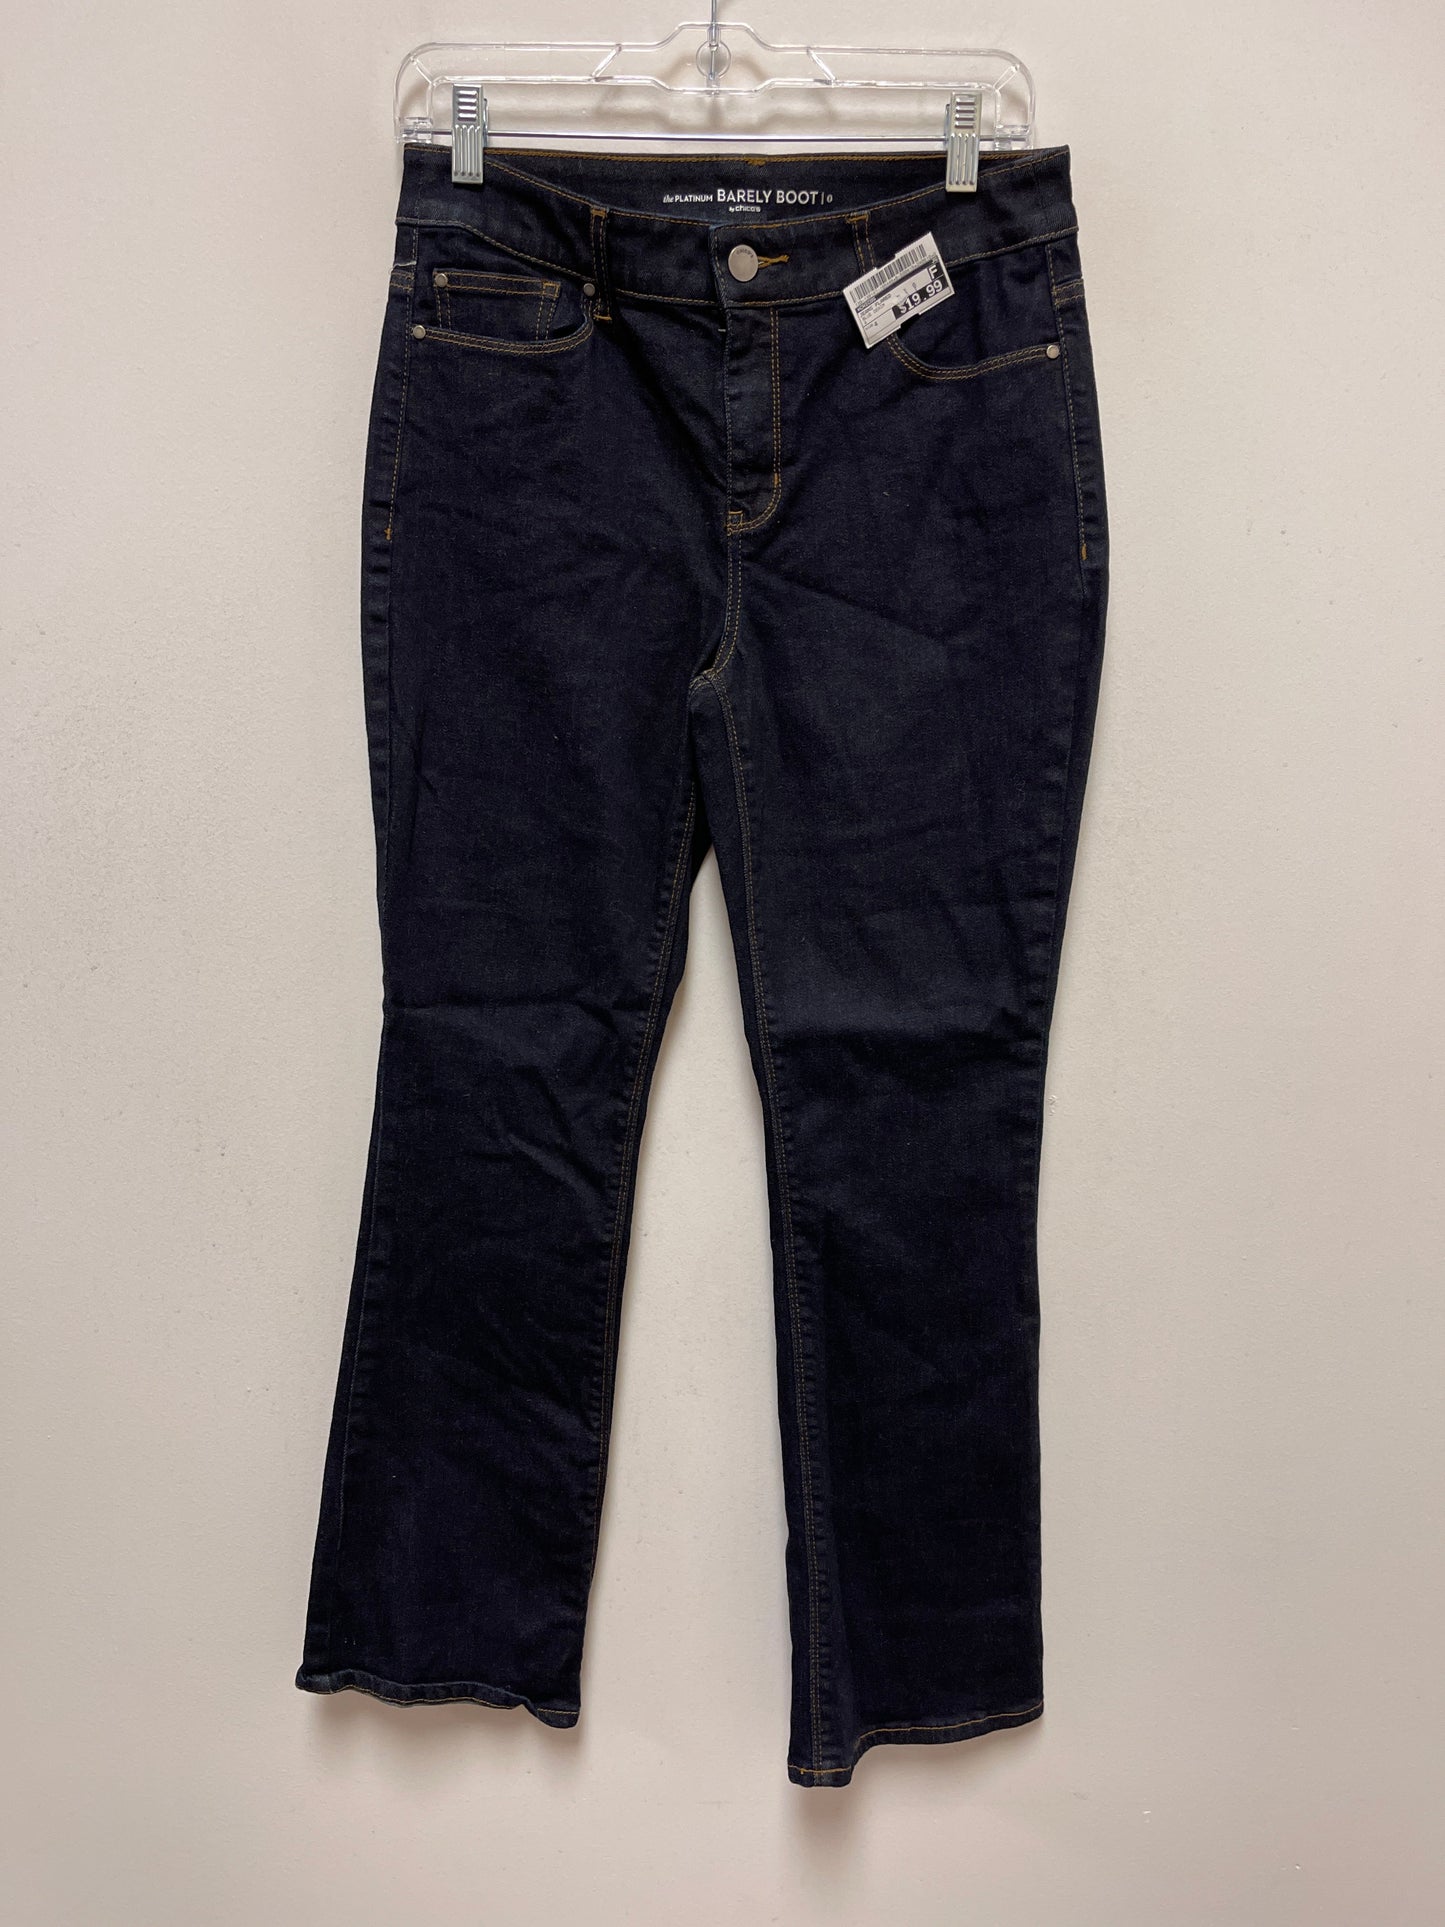 Blue Denim Jeans Flared Chicos, Size 4